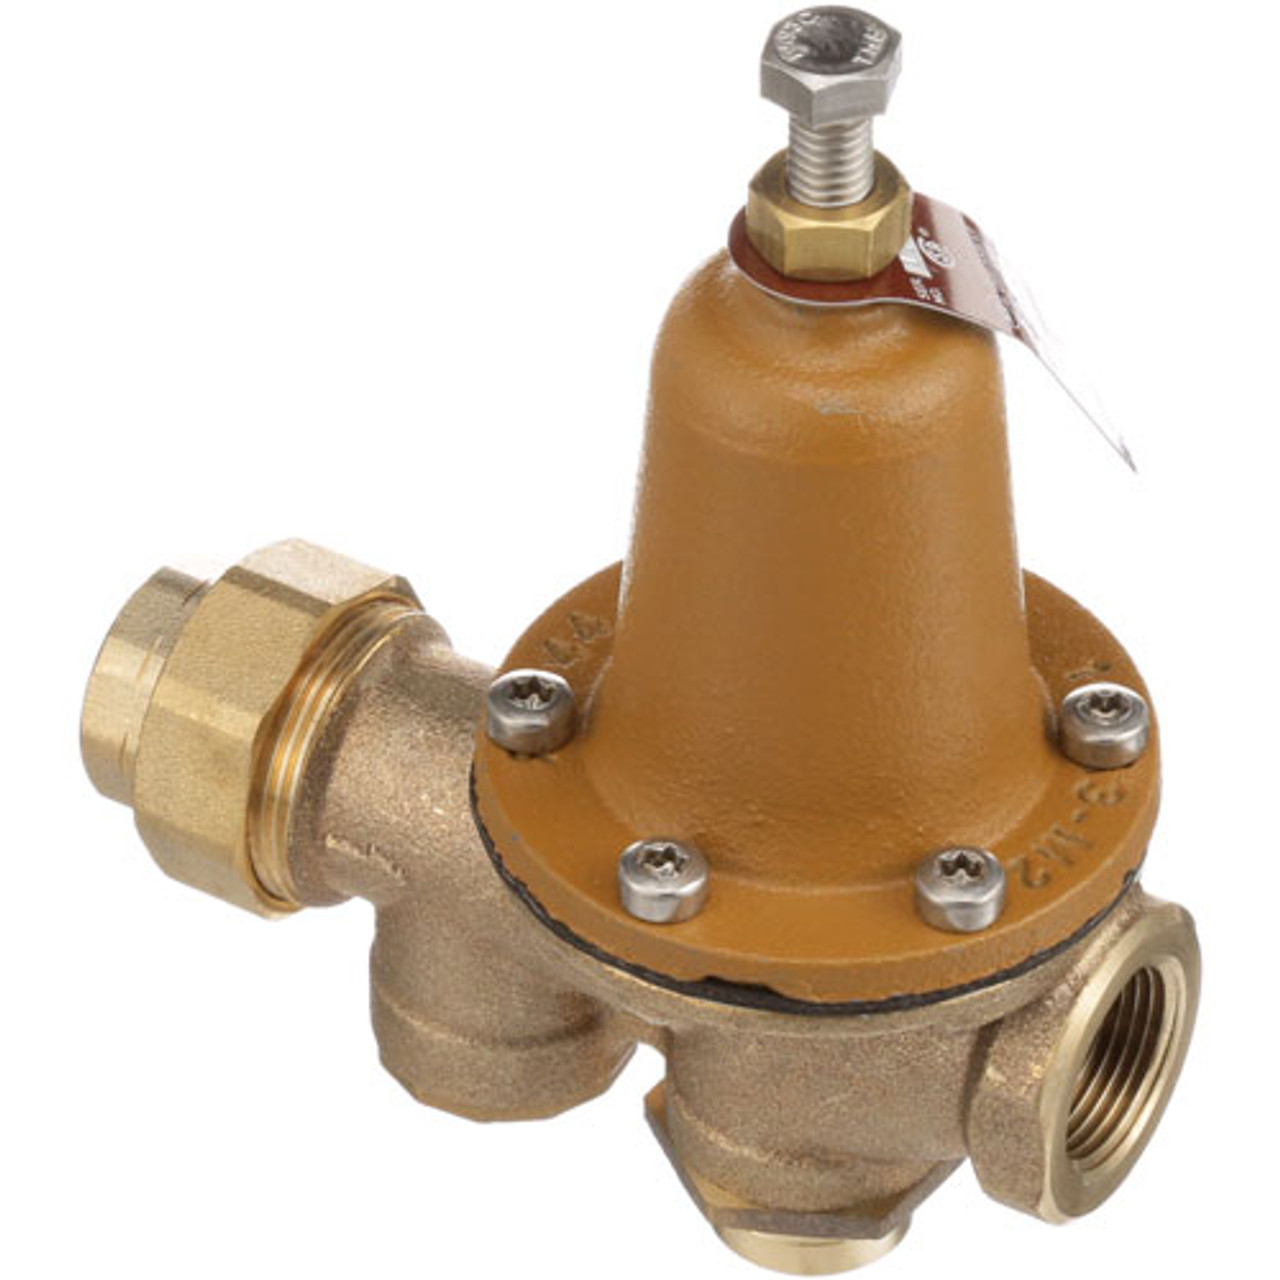 Pressure Reducing Valve 3/4" - Replacement Part For AllPoints 561156